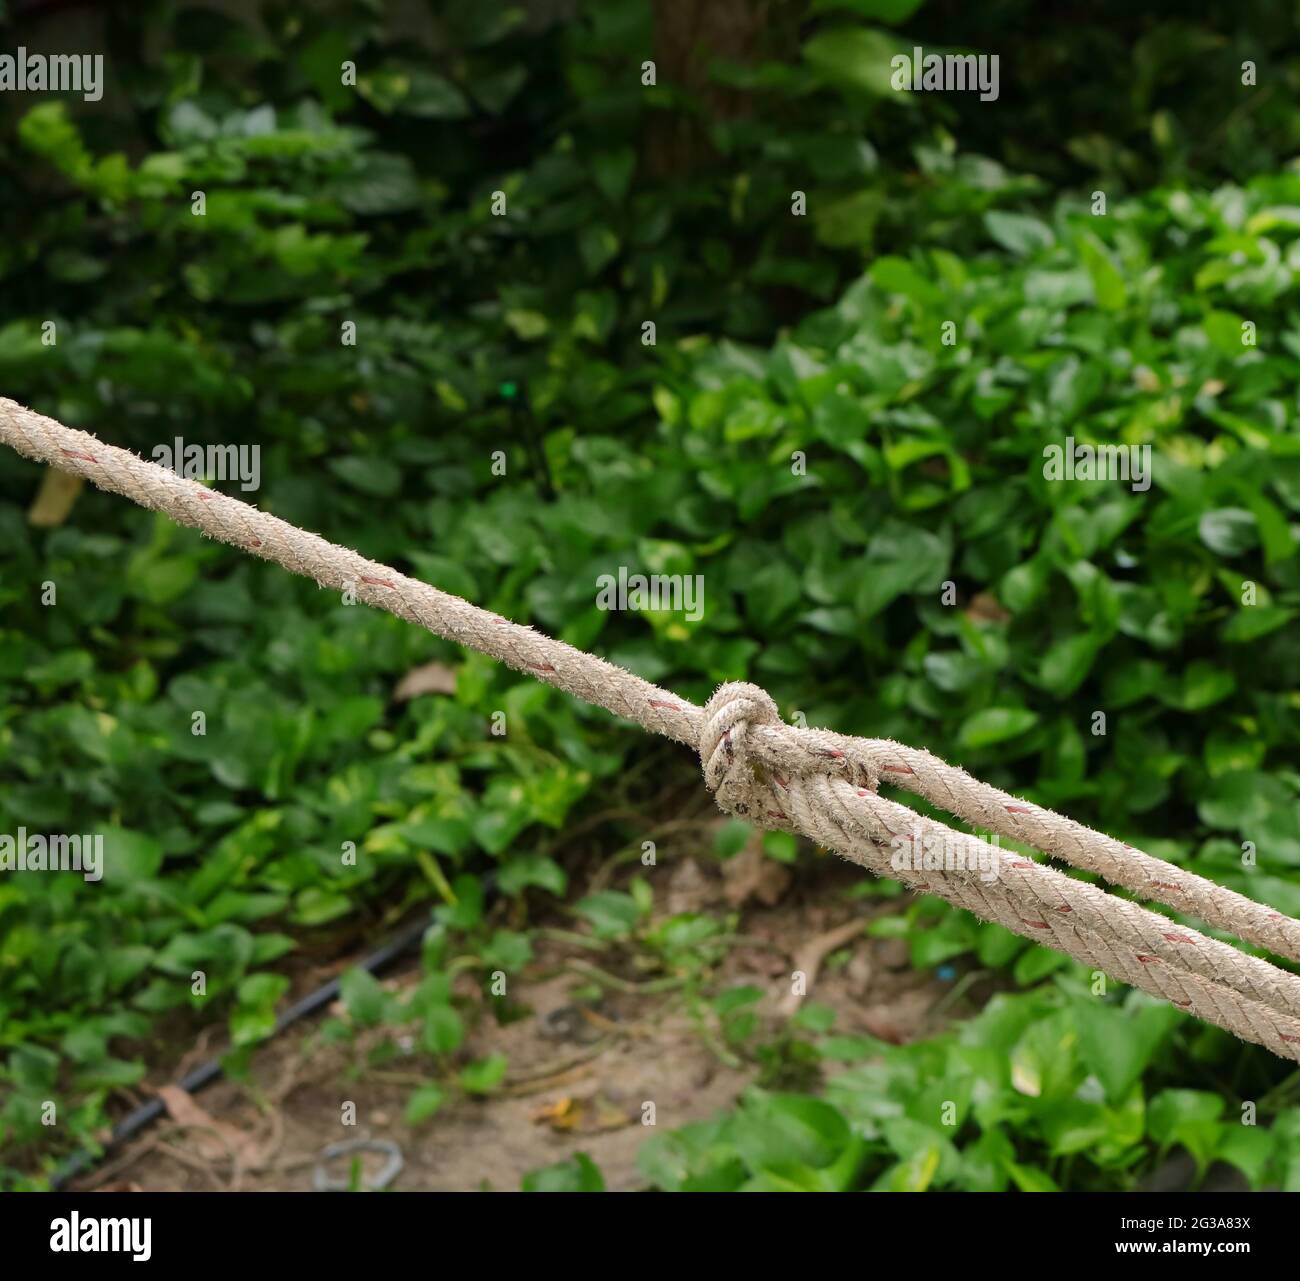 Closeup rope tied in knot in slant position in garden Stock Photo